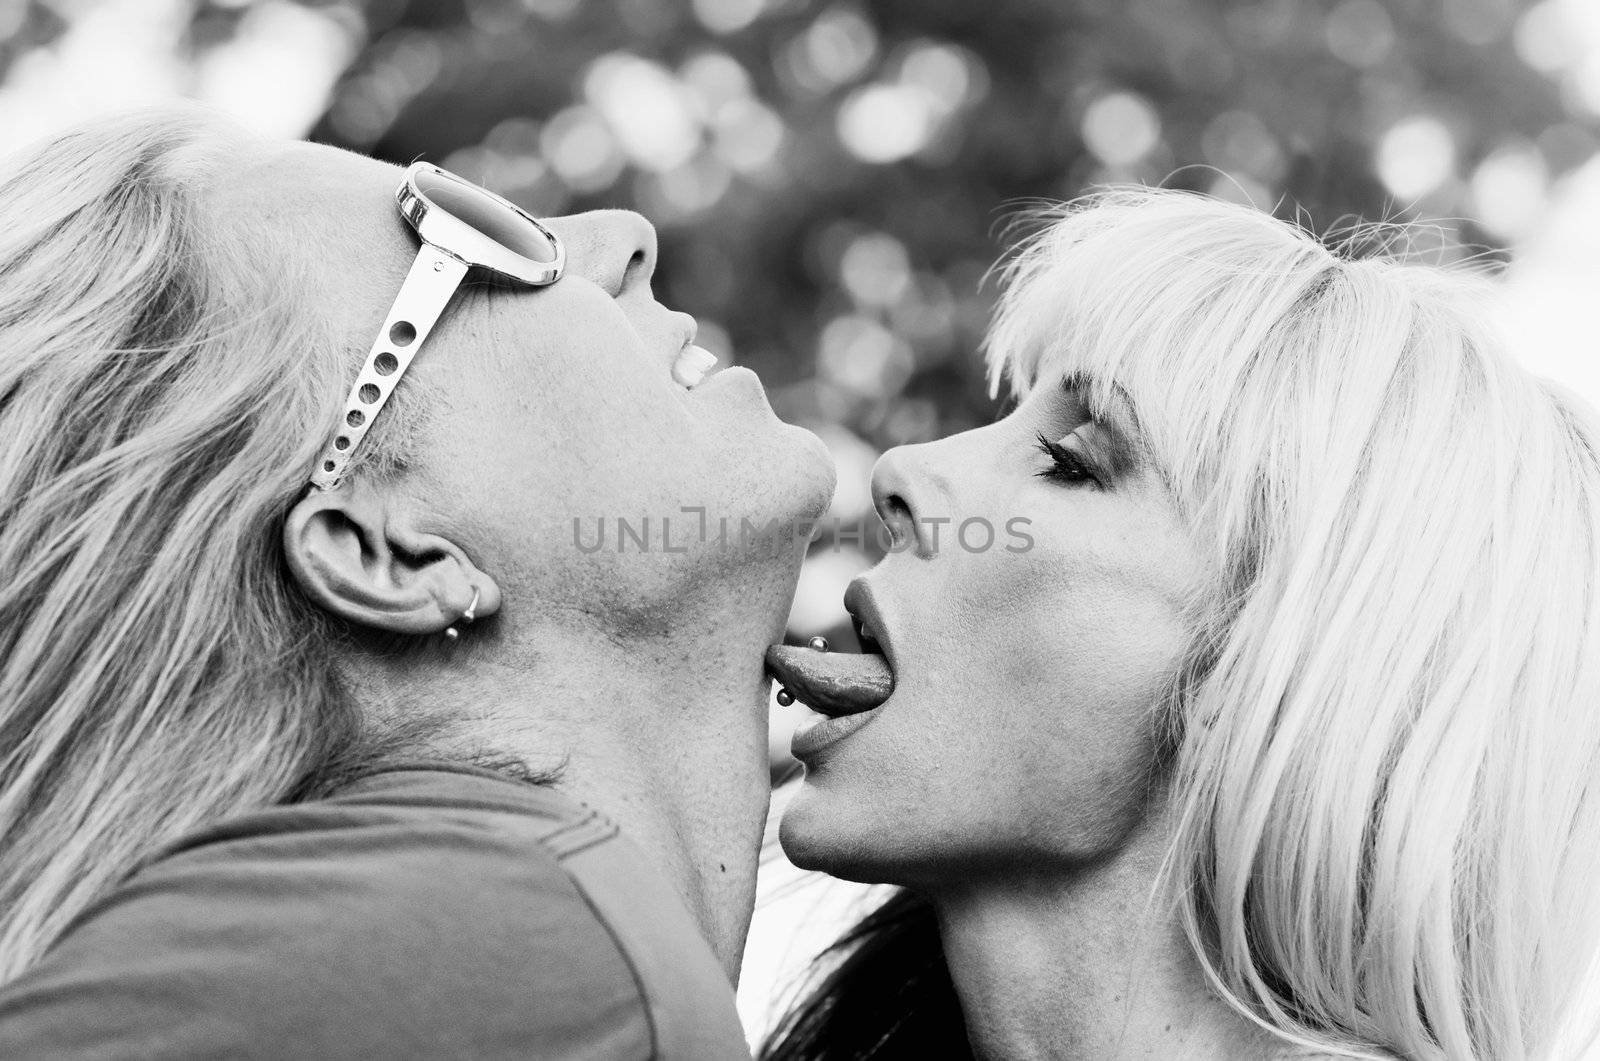 Woman with big eyes licking a man on the neck